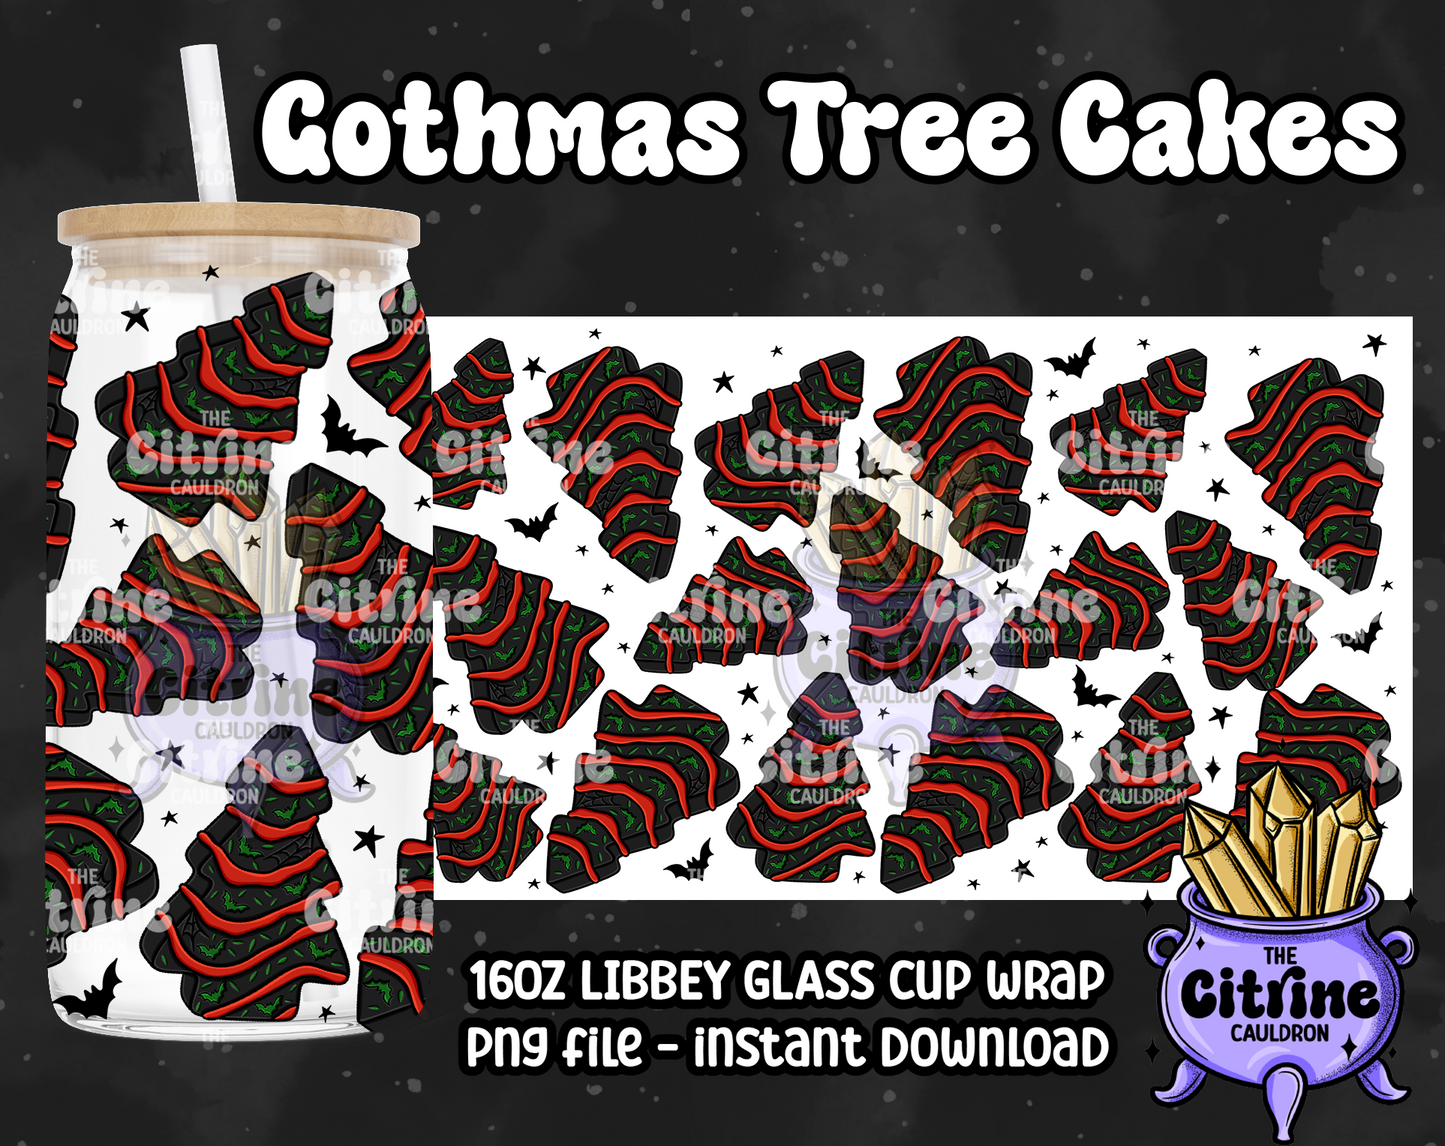 Gothmas Tree Cakes - PNG Wrap for Libbey 16oz Glass Can